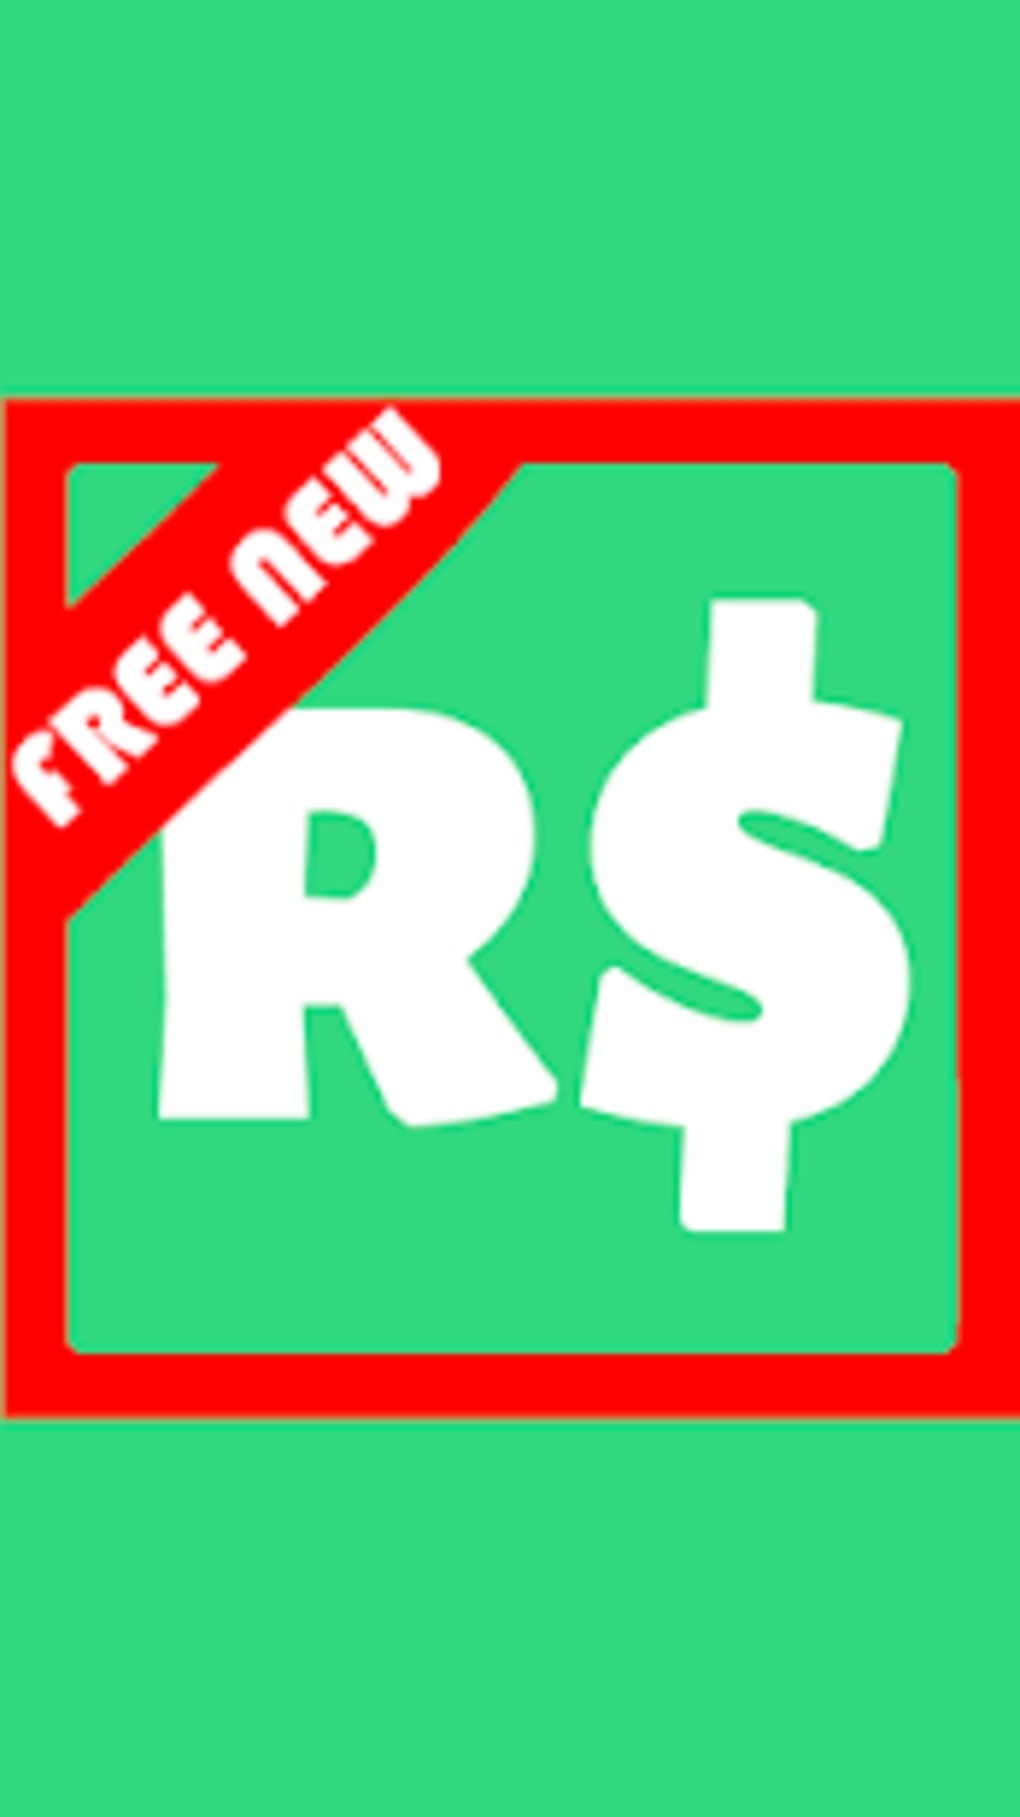 Free Robux Download File